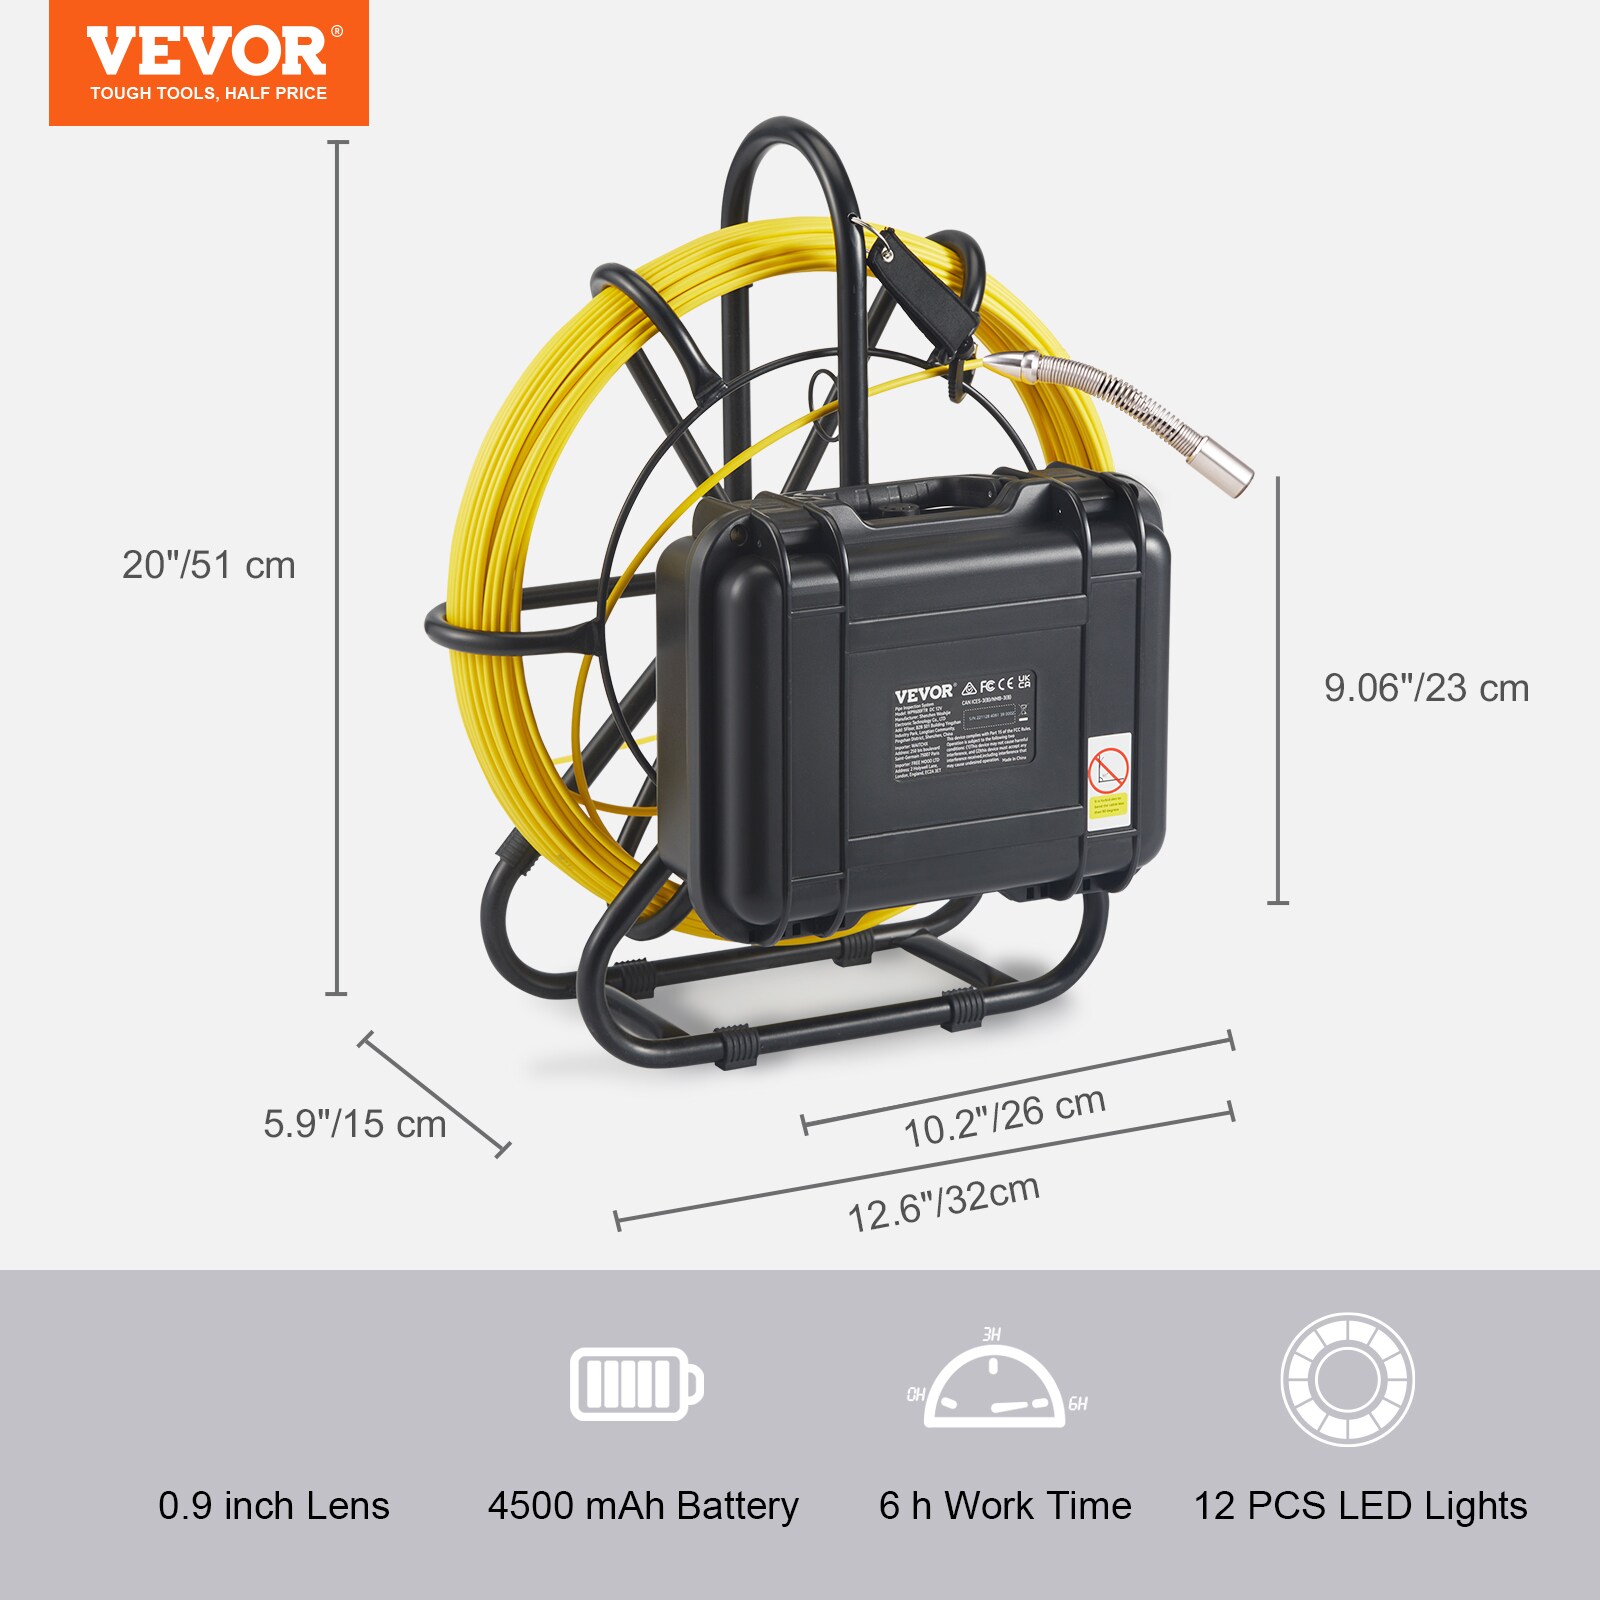 30m Industrial Endoscope 512Hz Sewer Camera Pipe HD Pipe Inspection Camera  for Water Pipe Endoscopy - China Endoscope Industrial Camera, Sewer Camera  Pipe Inspection with Locator